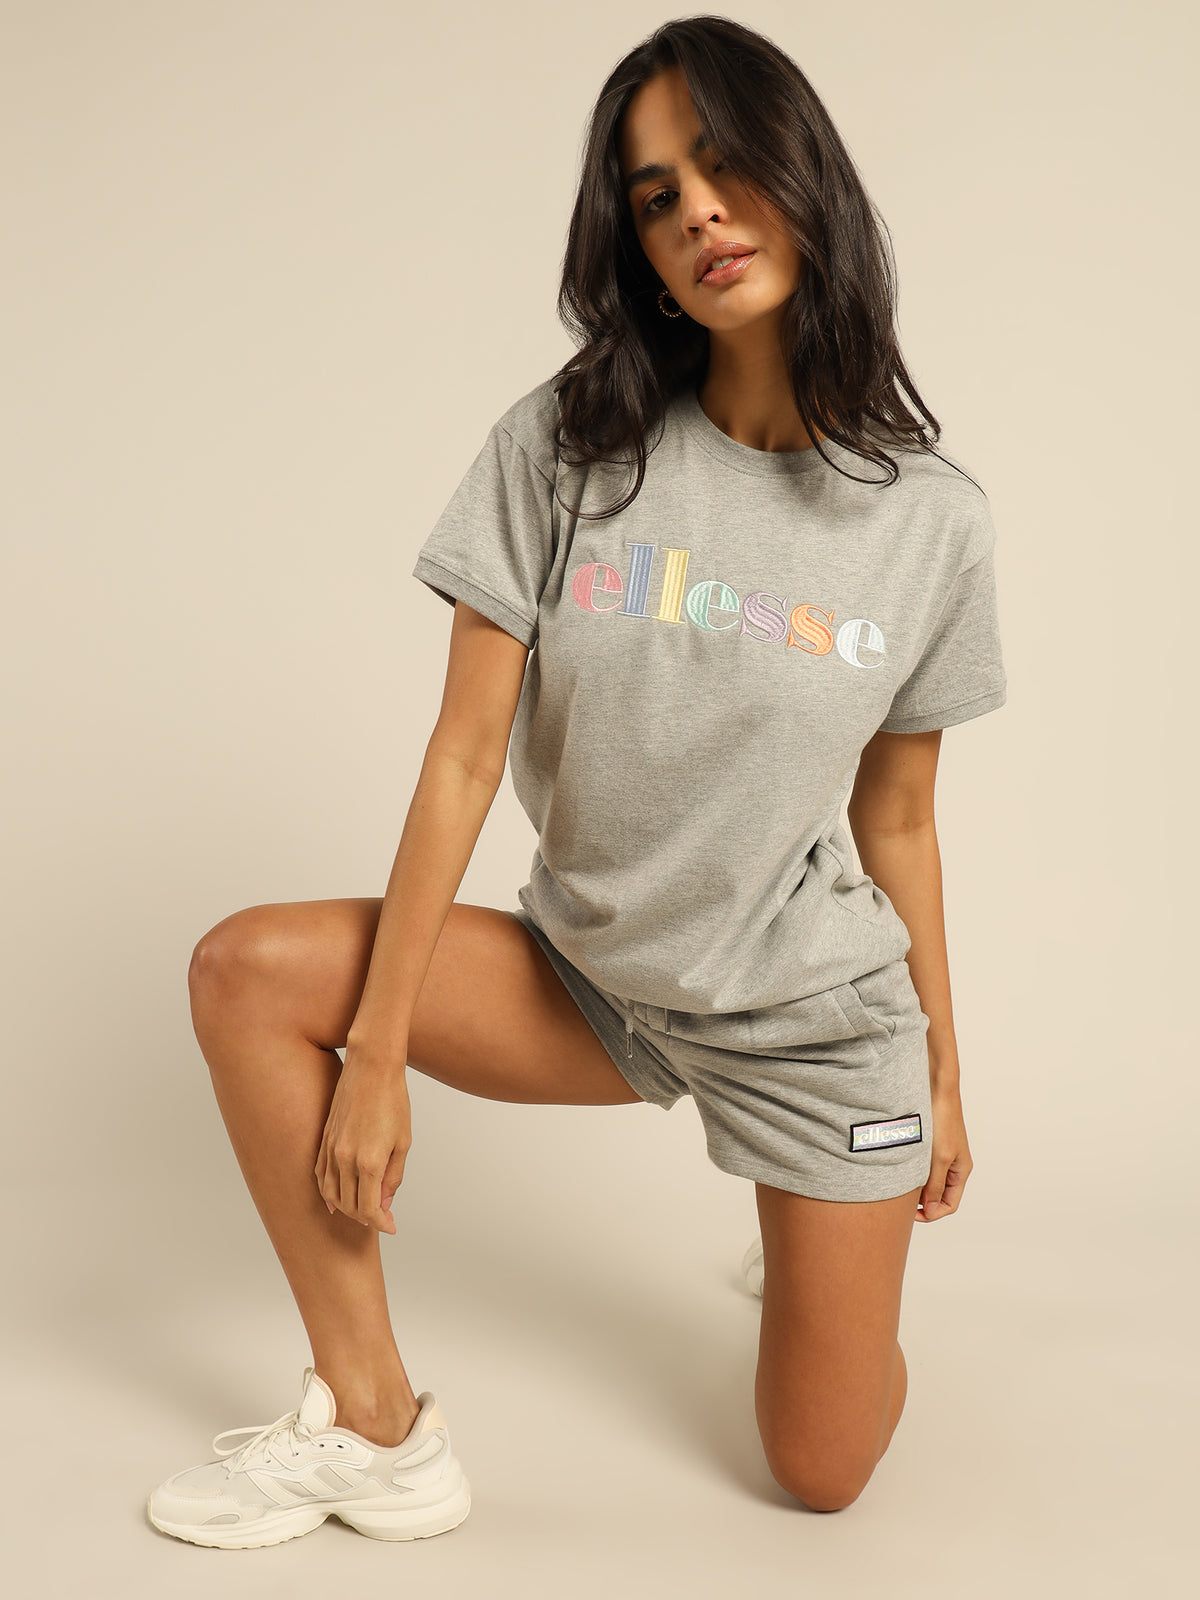 Changling T-Shirt in Grey Marle